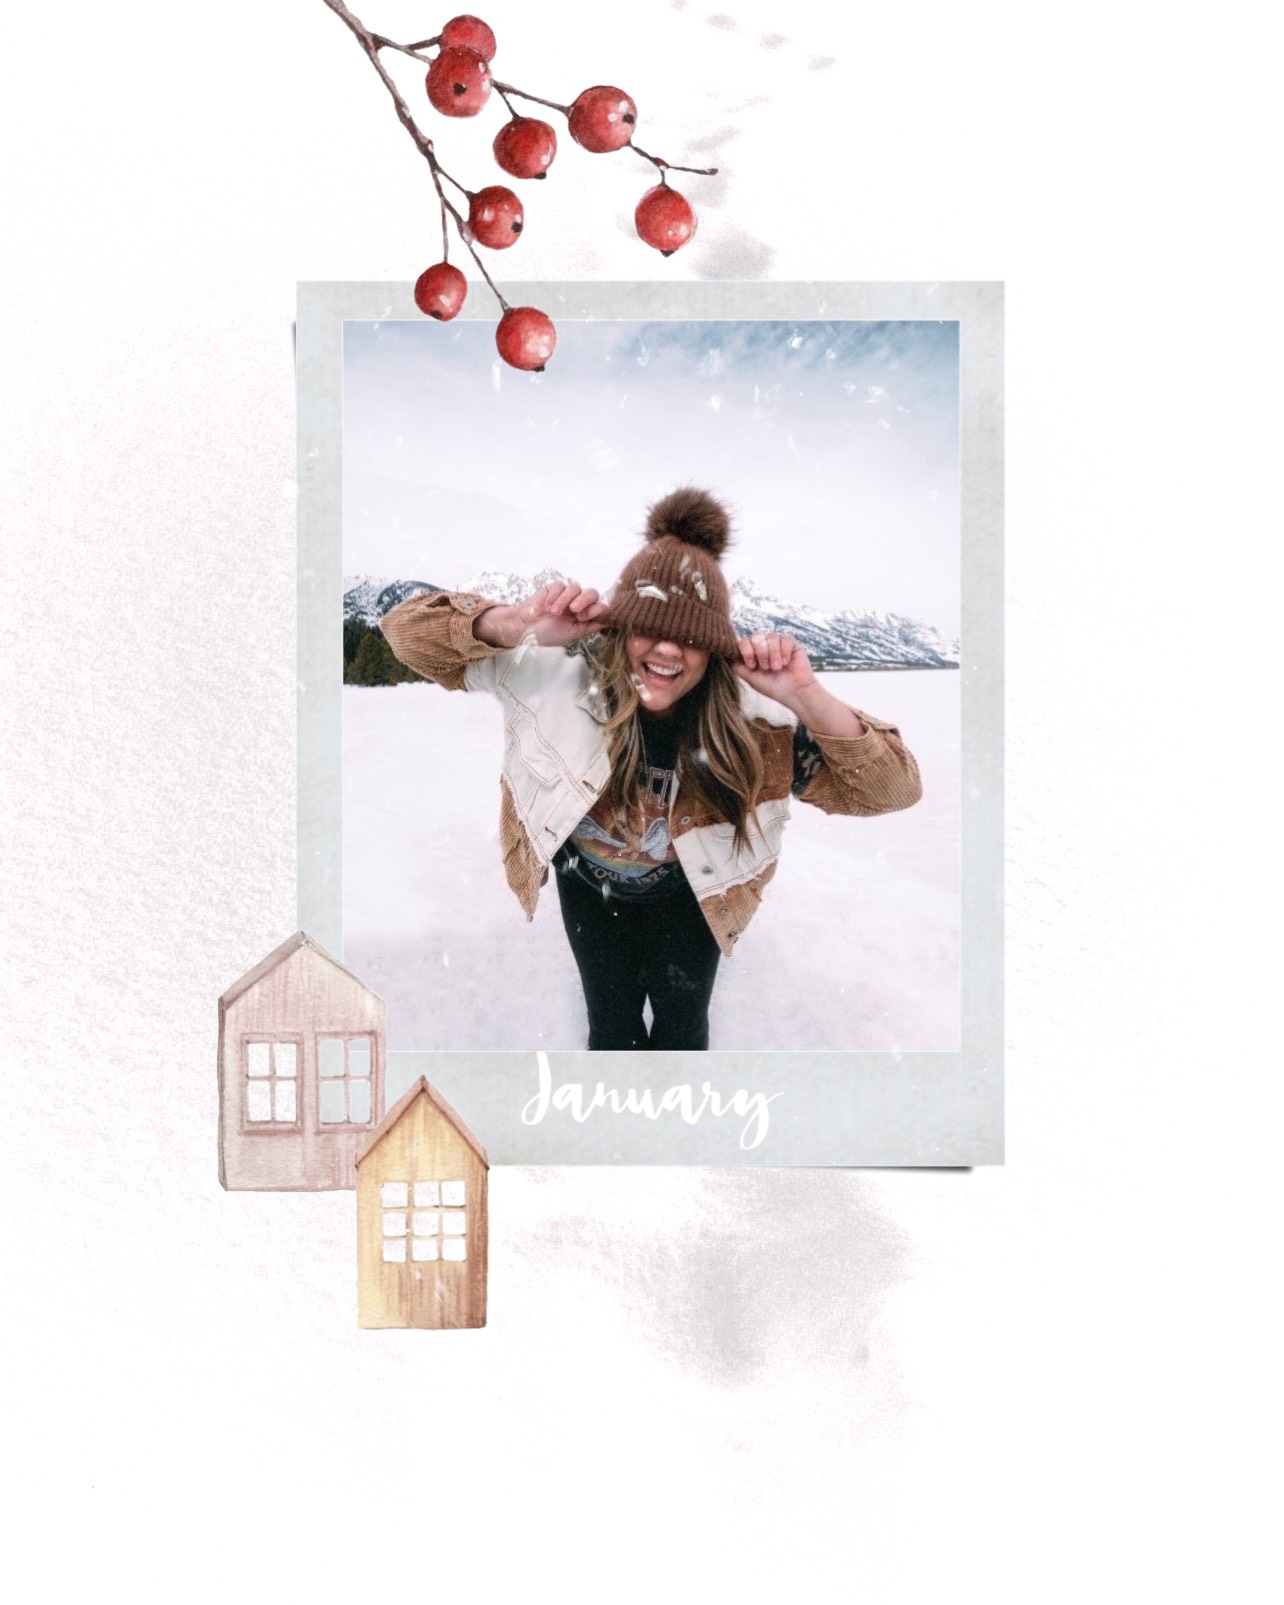 Woman in the snow during the month of january Winter Wonderland template